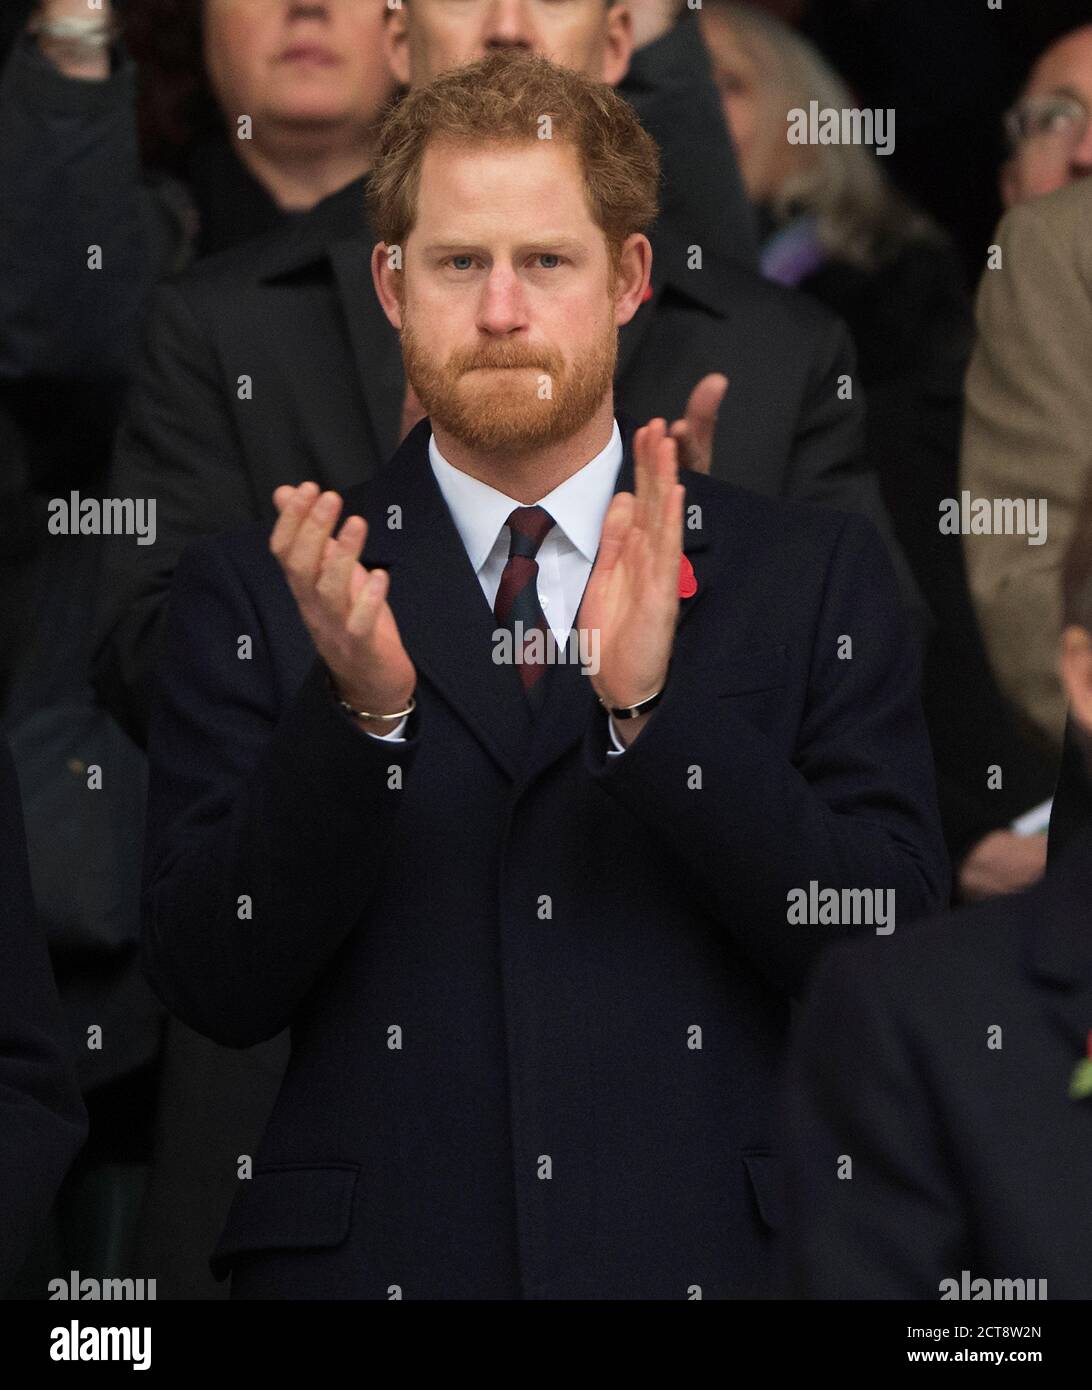 PRINCE HARRY ATTENDS THE MATCH IN AN OFFICIAL CAPACITY AS VICE PRESIDENT OF THE RFU.  England v South Africa. Picture Credit  : © Mark Pain / Alamy Stock Photo